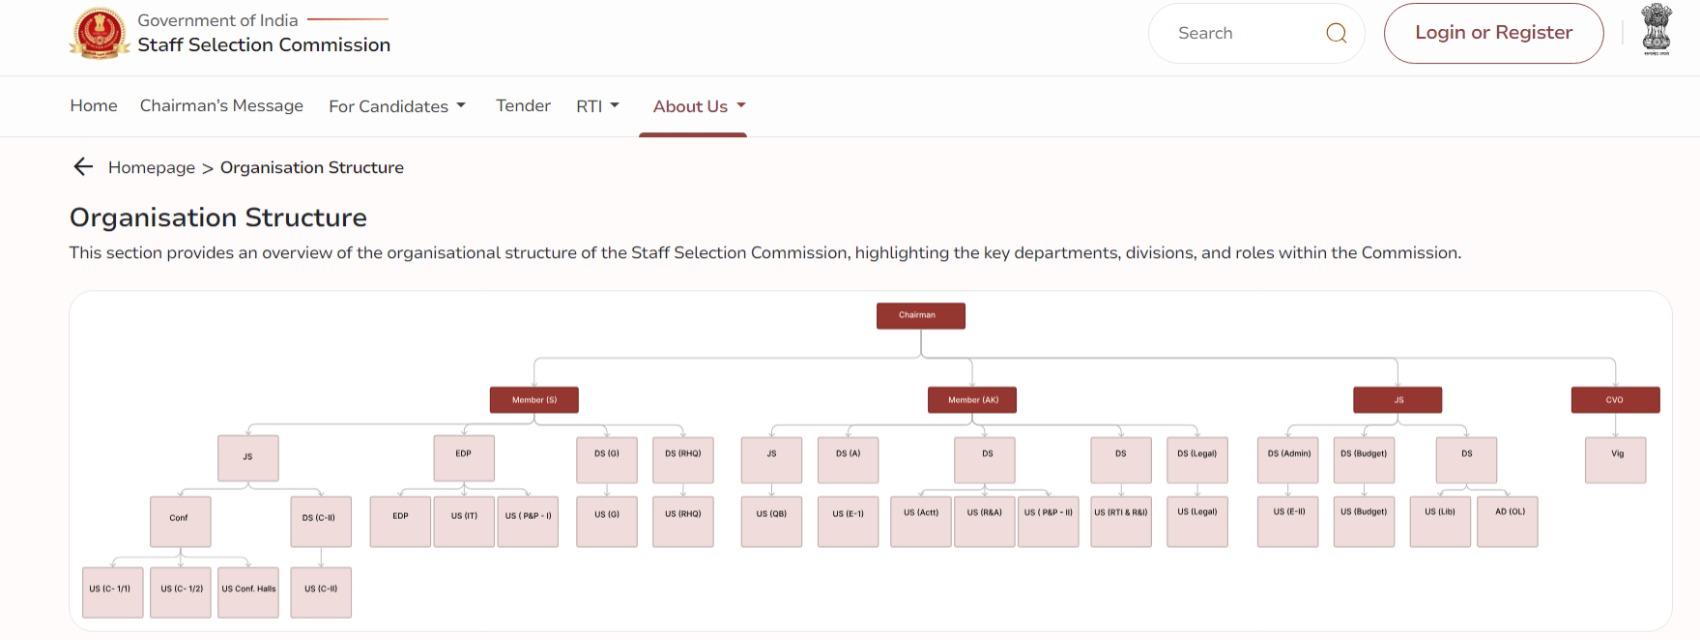 Organizational Structure of SSC and Complaint Registration